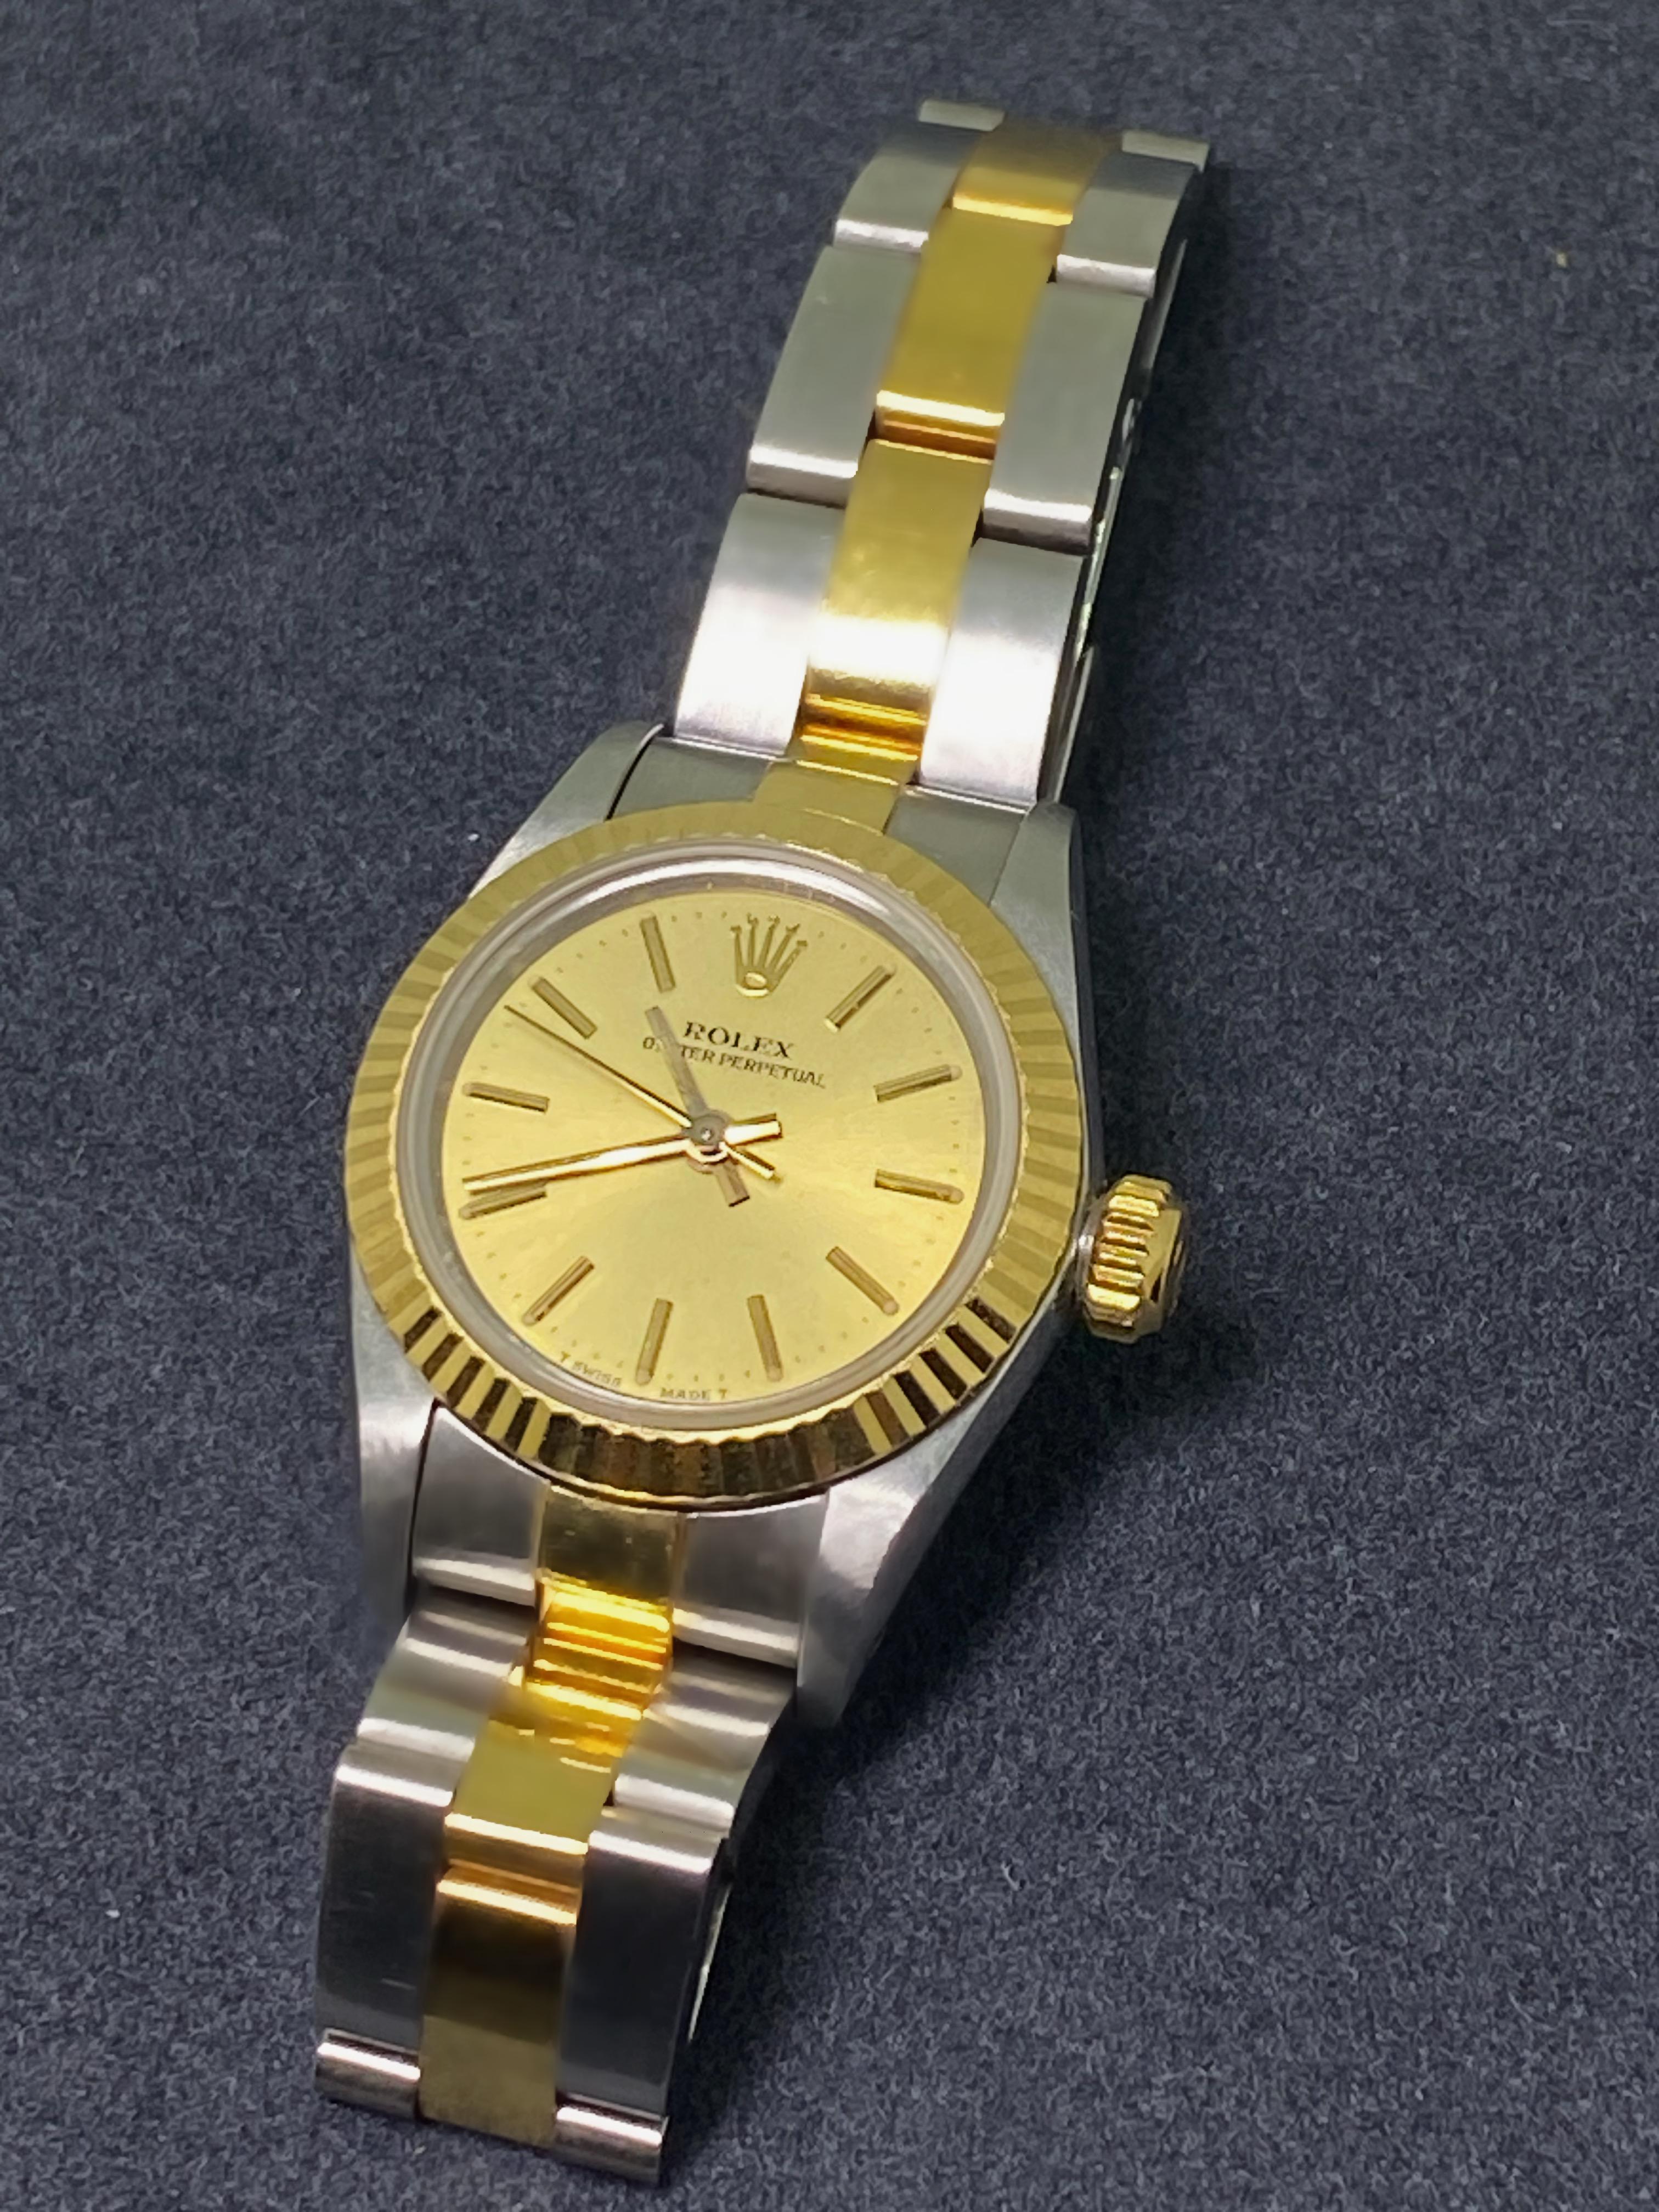 Rolex Oyster ref 67000 Two Tone Champagne Dial Automatic Caliber 2130 Watch 2